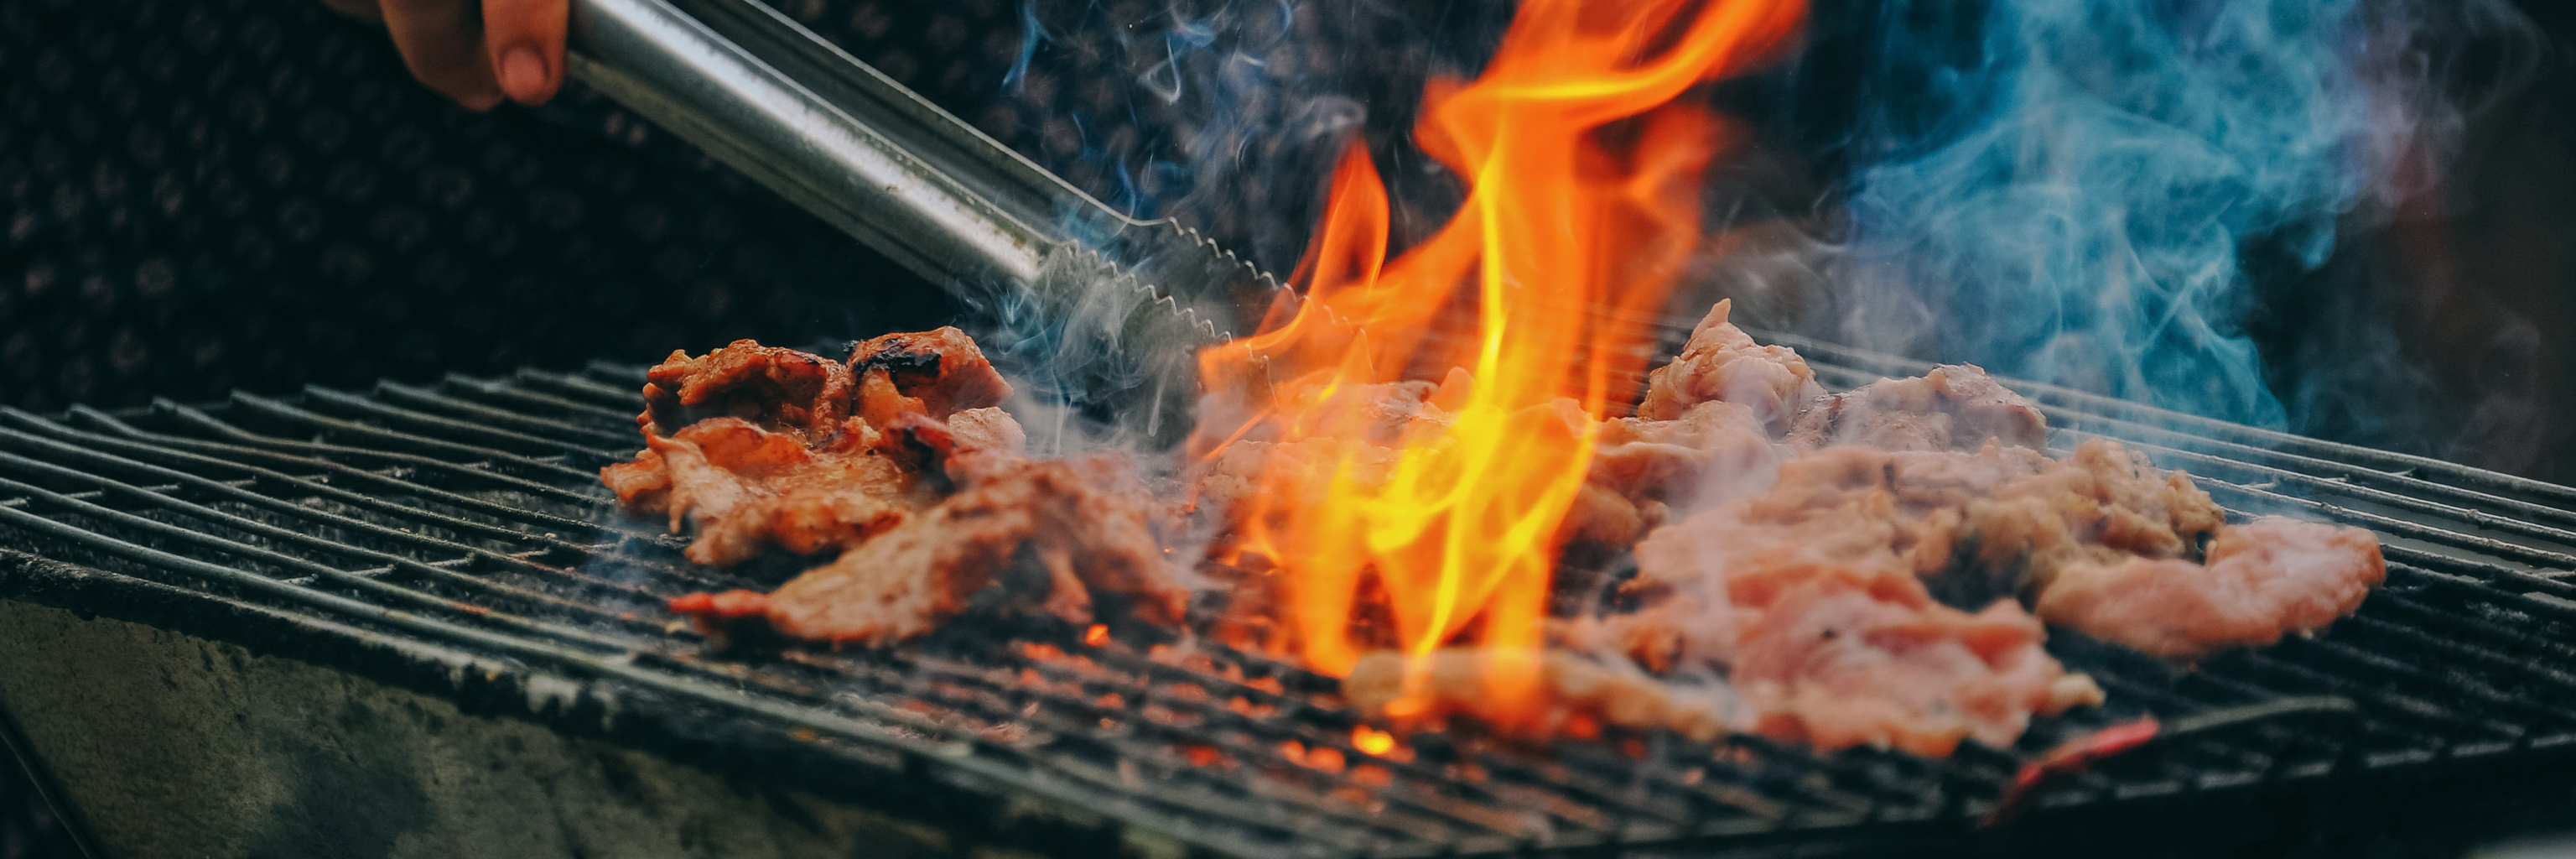 Meat being cooked on a fiery hot grill. 